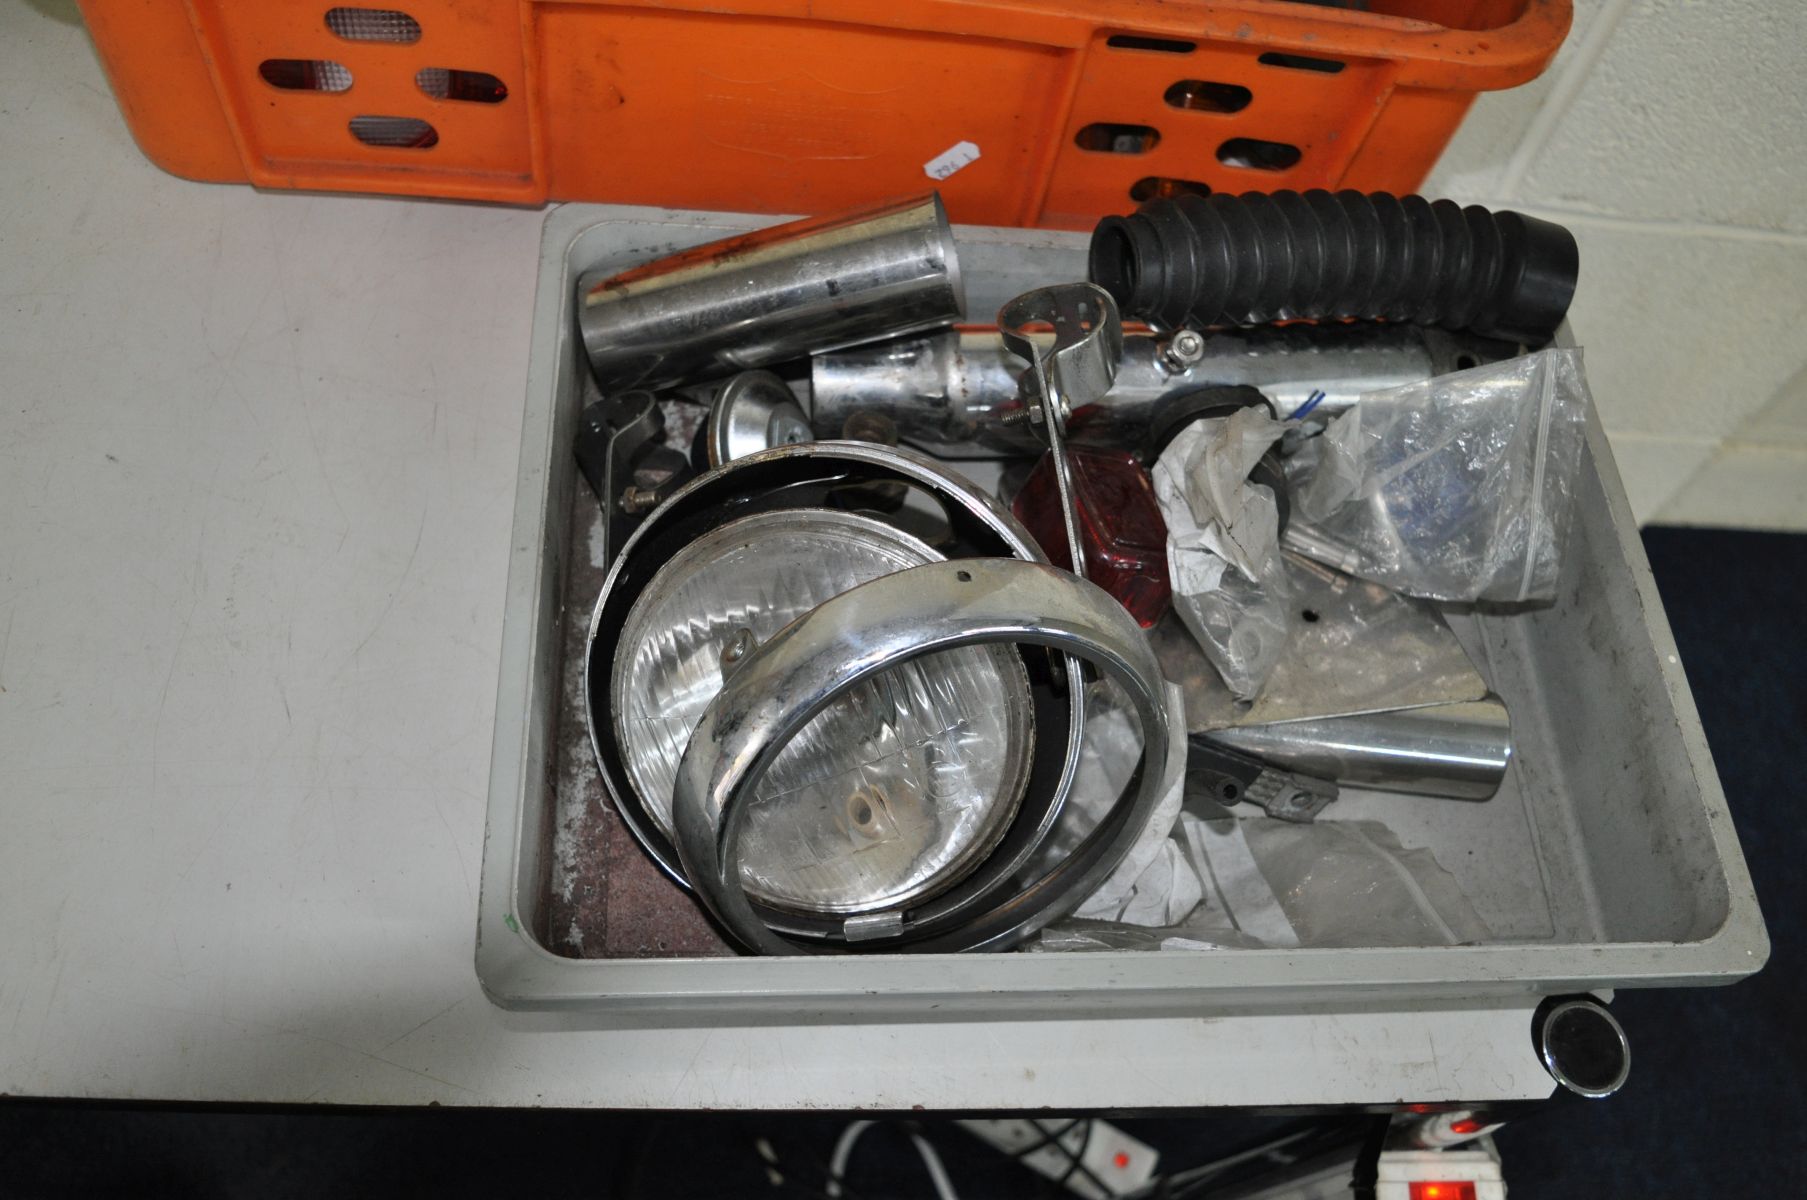 TWO TRAYS CONTAINING VINTAGE AUTOMOTIVE PARTS, including a motorbike fuel tank, mud guards, handle - Image 3 of 4